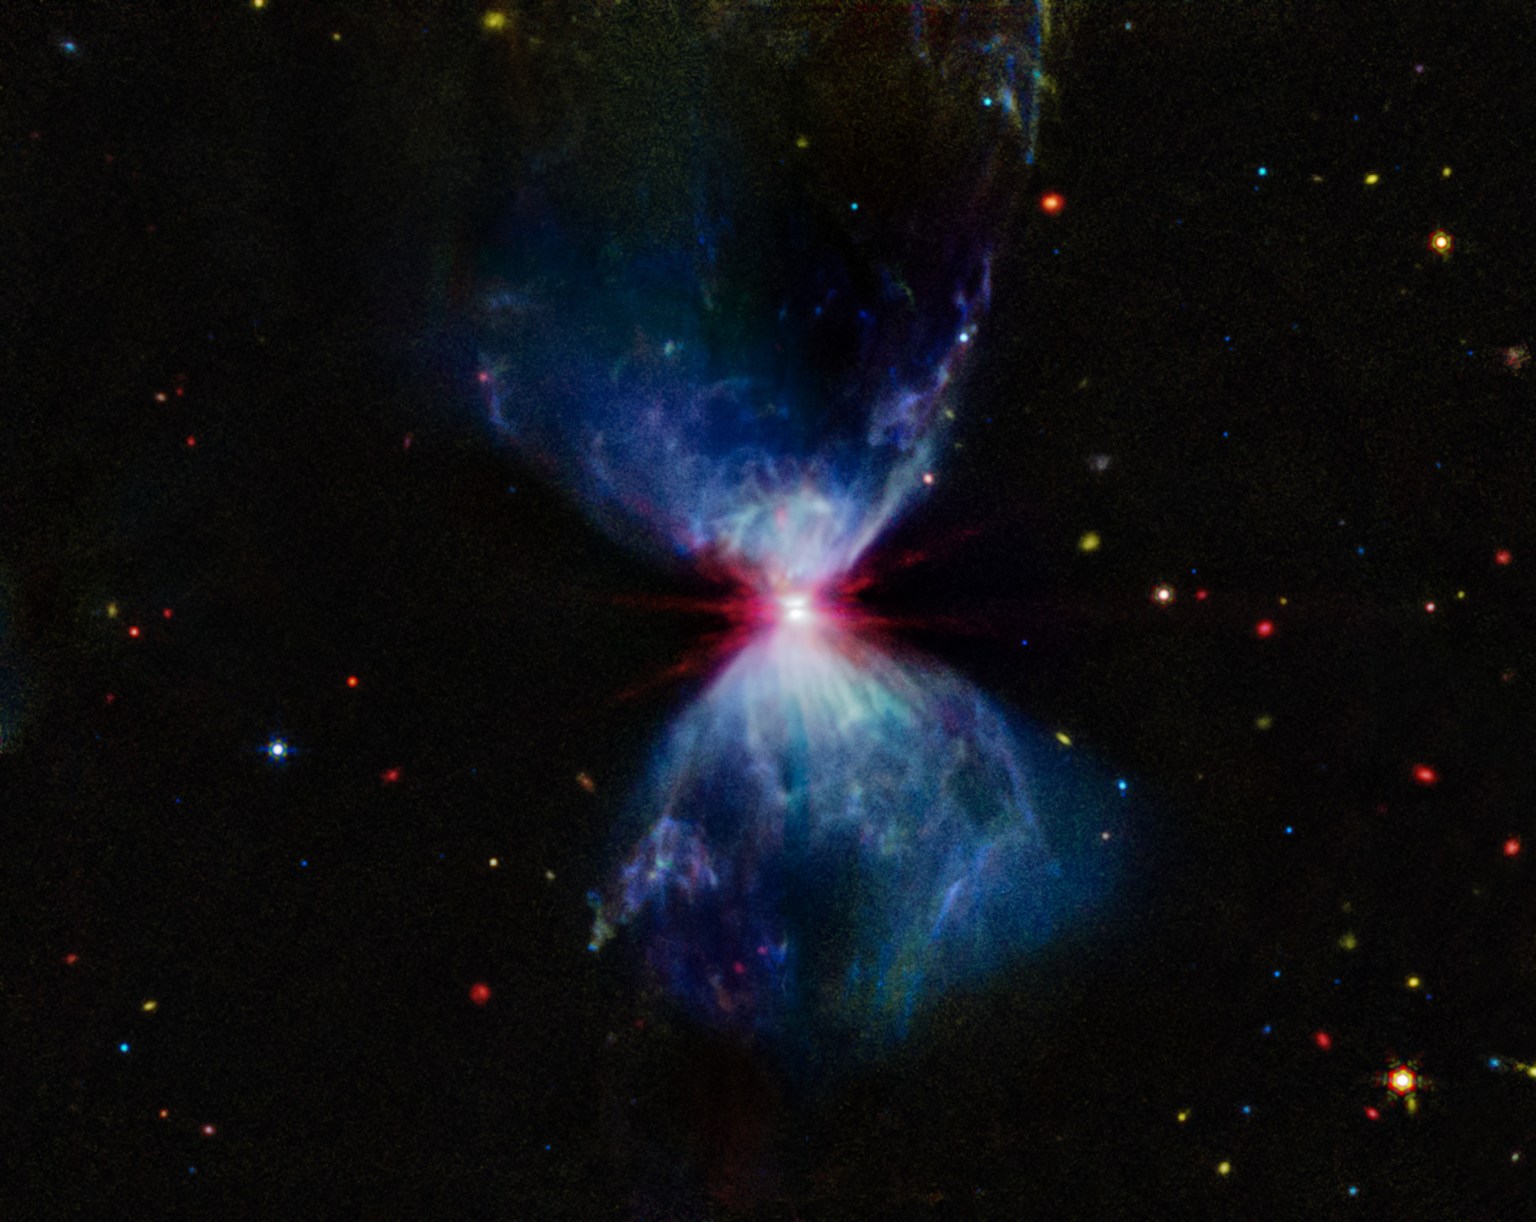 A growing protostar embedded within a molecular cloud. The center of the image shows a bright, red region, where the growing protostar resides, with a thin, gray lane of matter cutting through it horizontally, which is the protostar’s accretion disk. Above and below this region are blue triangular-shaped molecular clouds, which give the overall object an hourglass shape. The areas in the molecular clouds closest to the protostar have more pronounced plumes of blue gas. There are red, yellow, orange, blue, and green stars and galaxies scattered across the background.